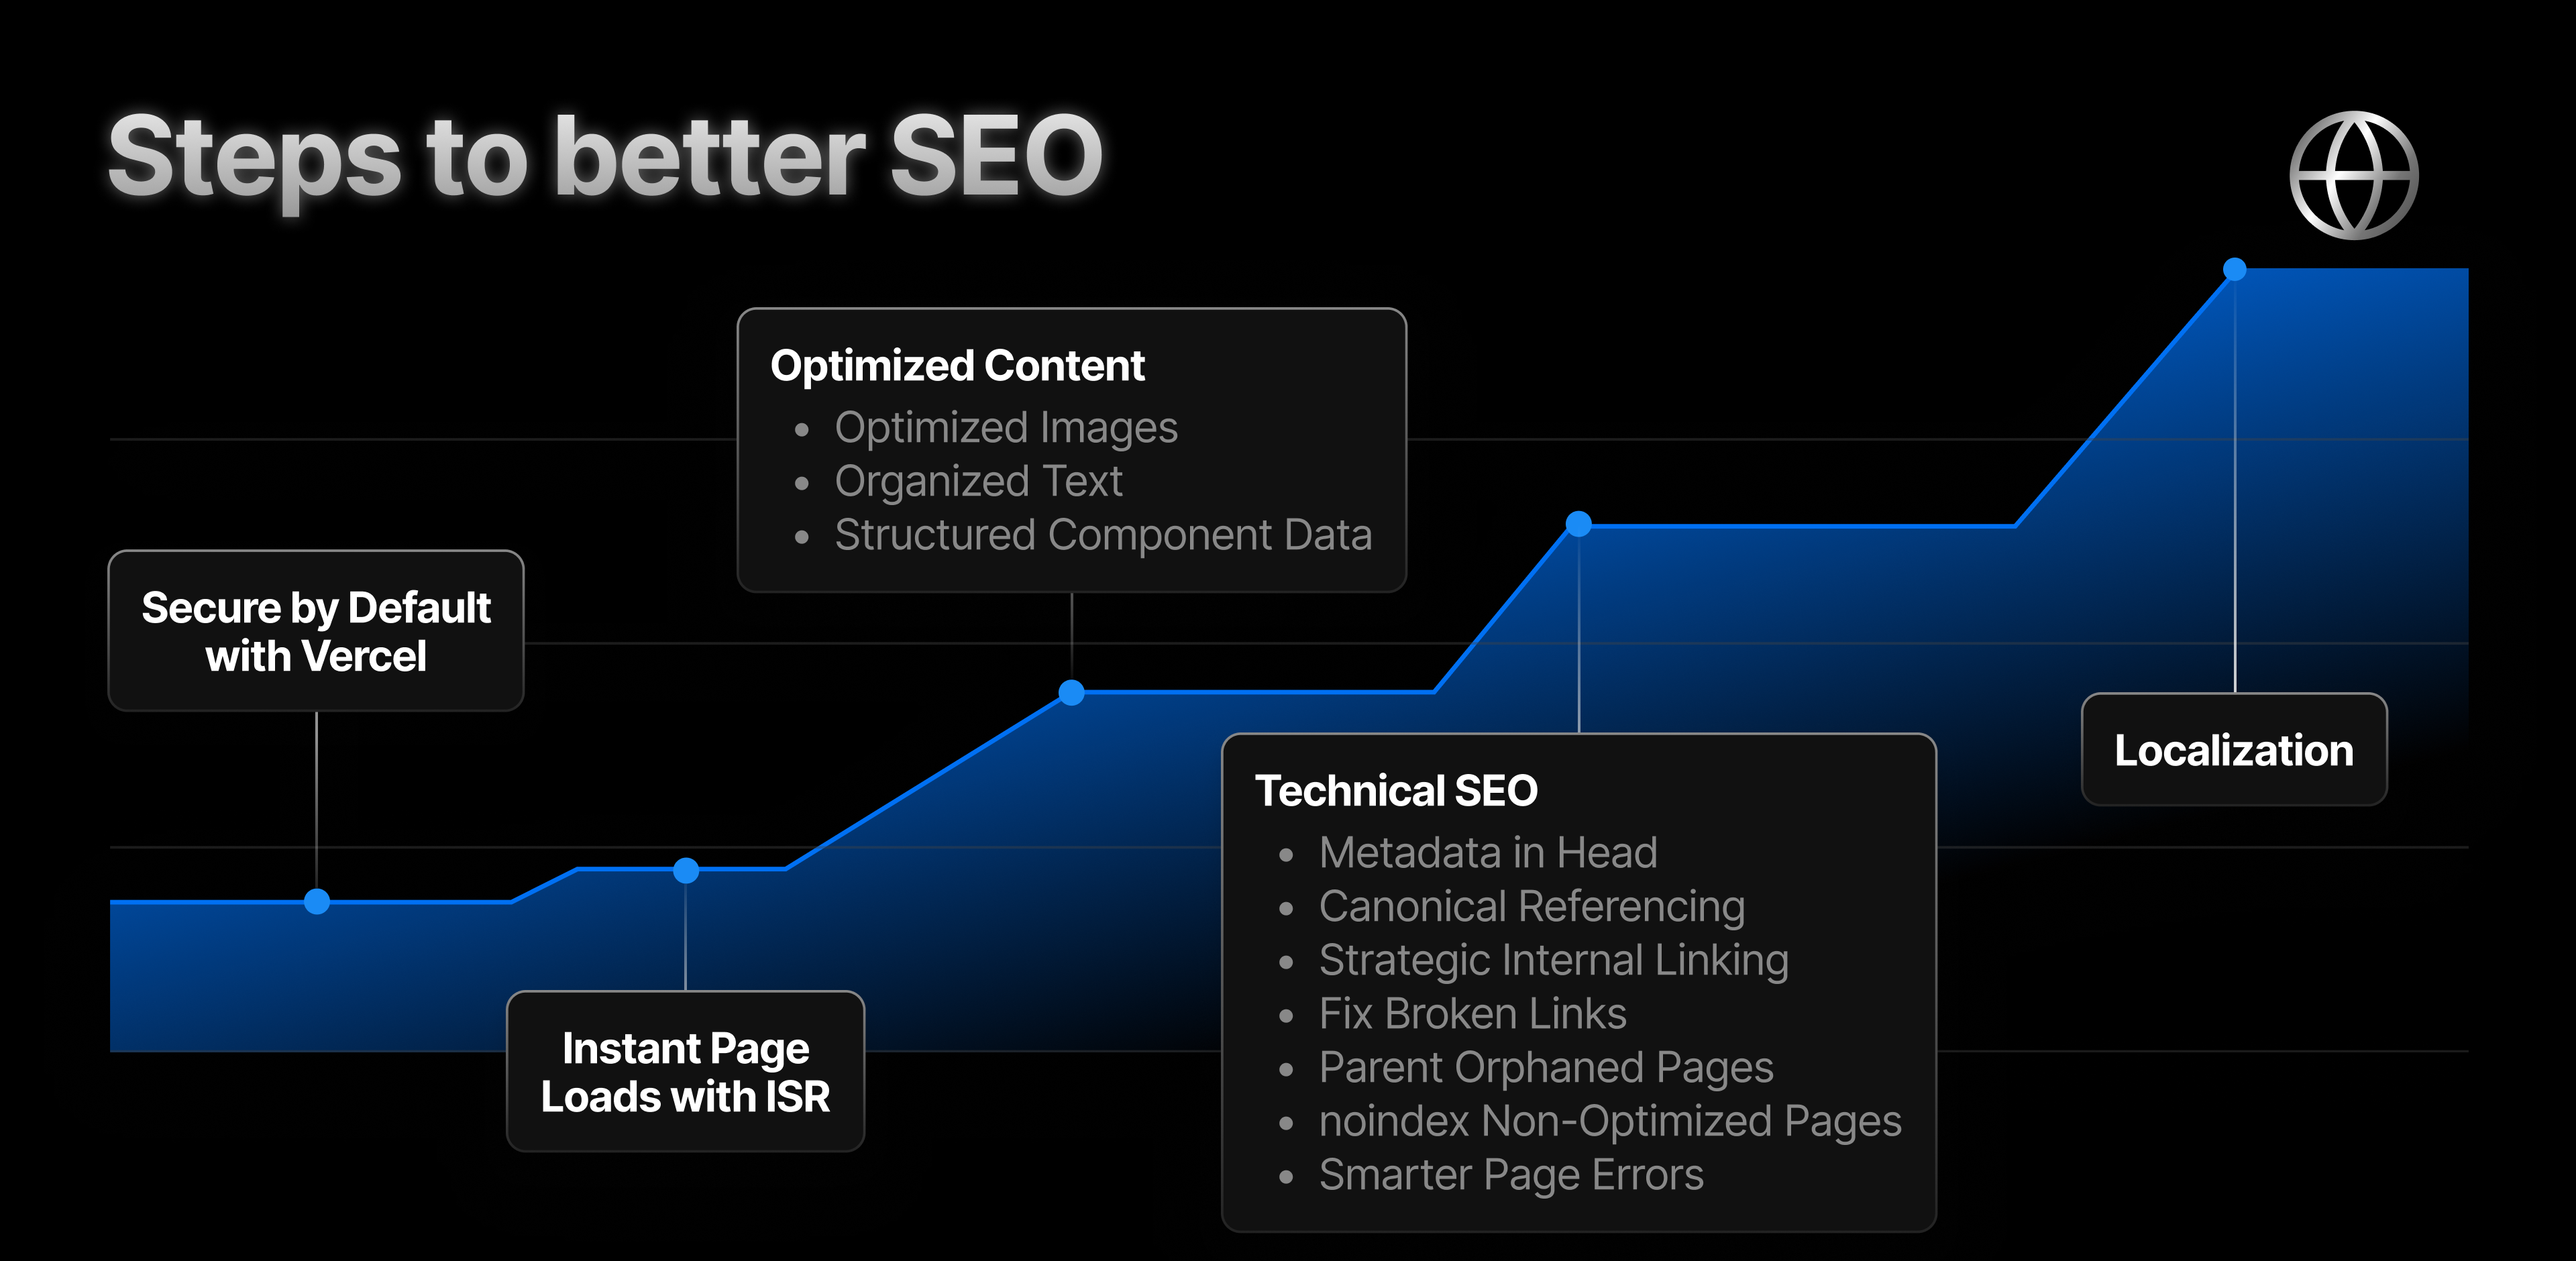 Adopting SEO is an incremental process where each step allows you to rank higher in search engines while bettering your user experience.